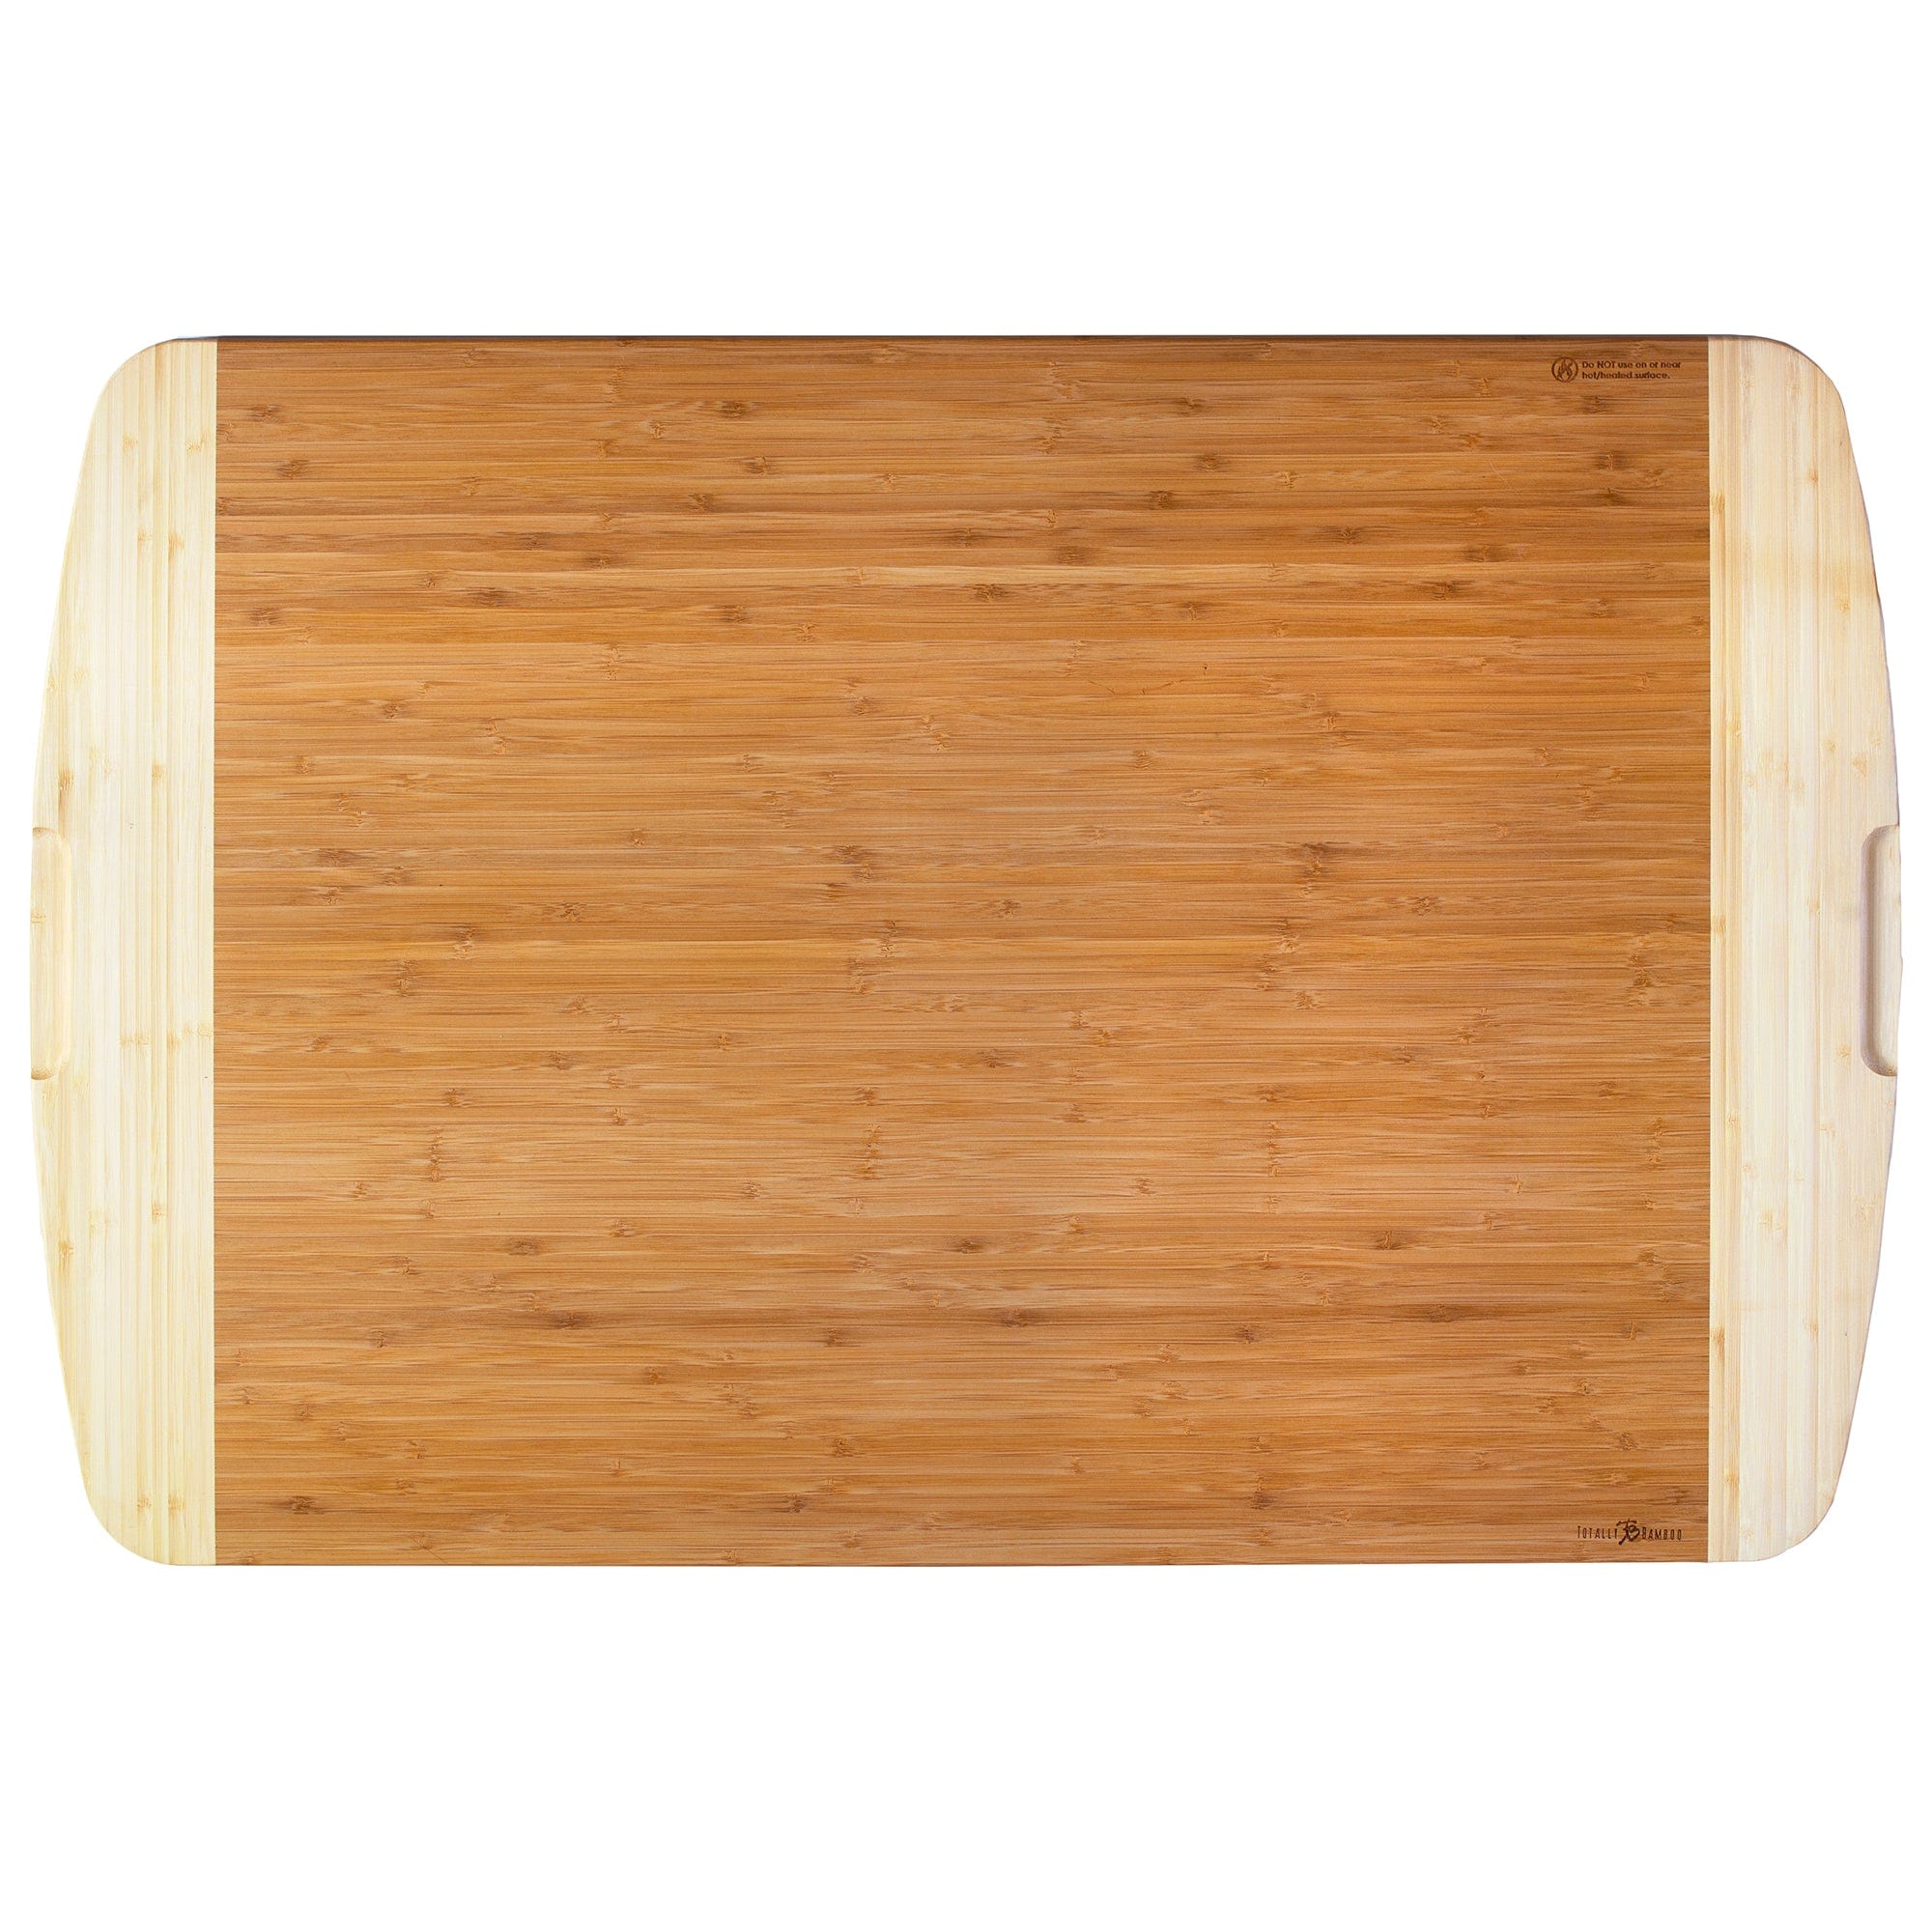 Totally Bamboo 36 inch x 24 inch Bamboo Wood XXL Cutting Board, Stove Top Cover or Over The Sink Chopping Block, Noodle Board and Giant Charcuterie